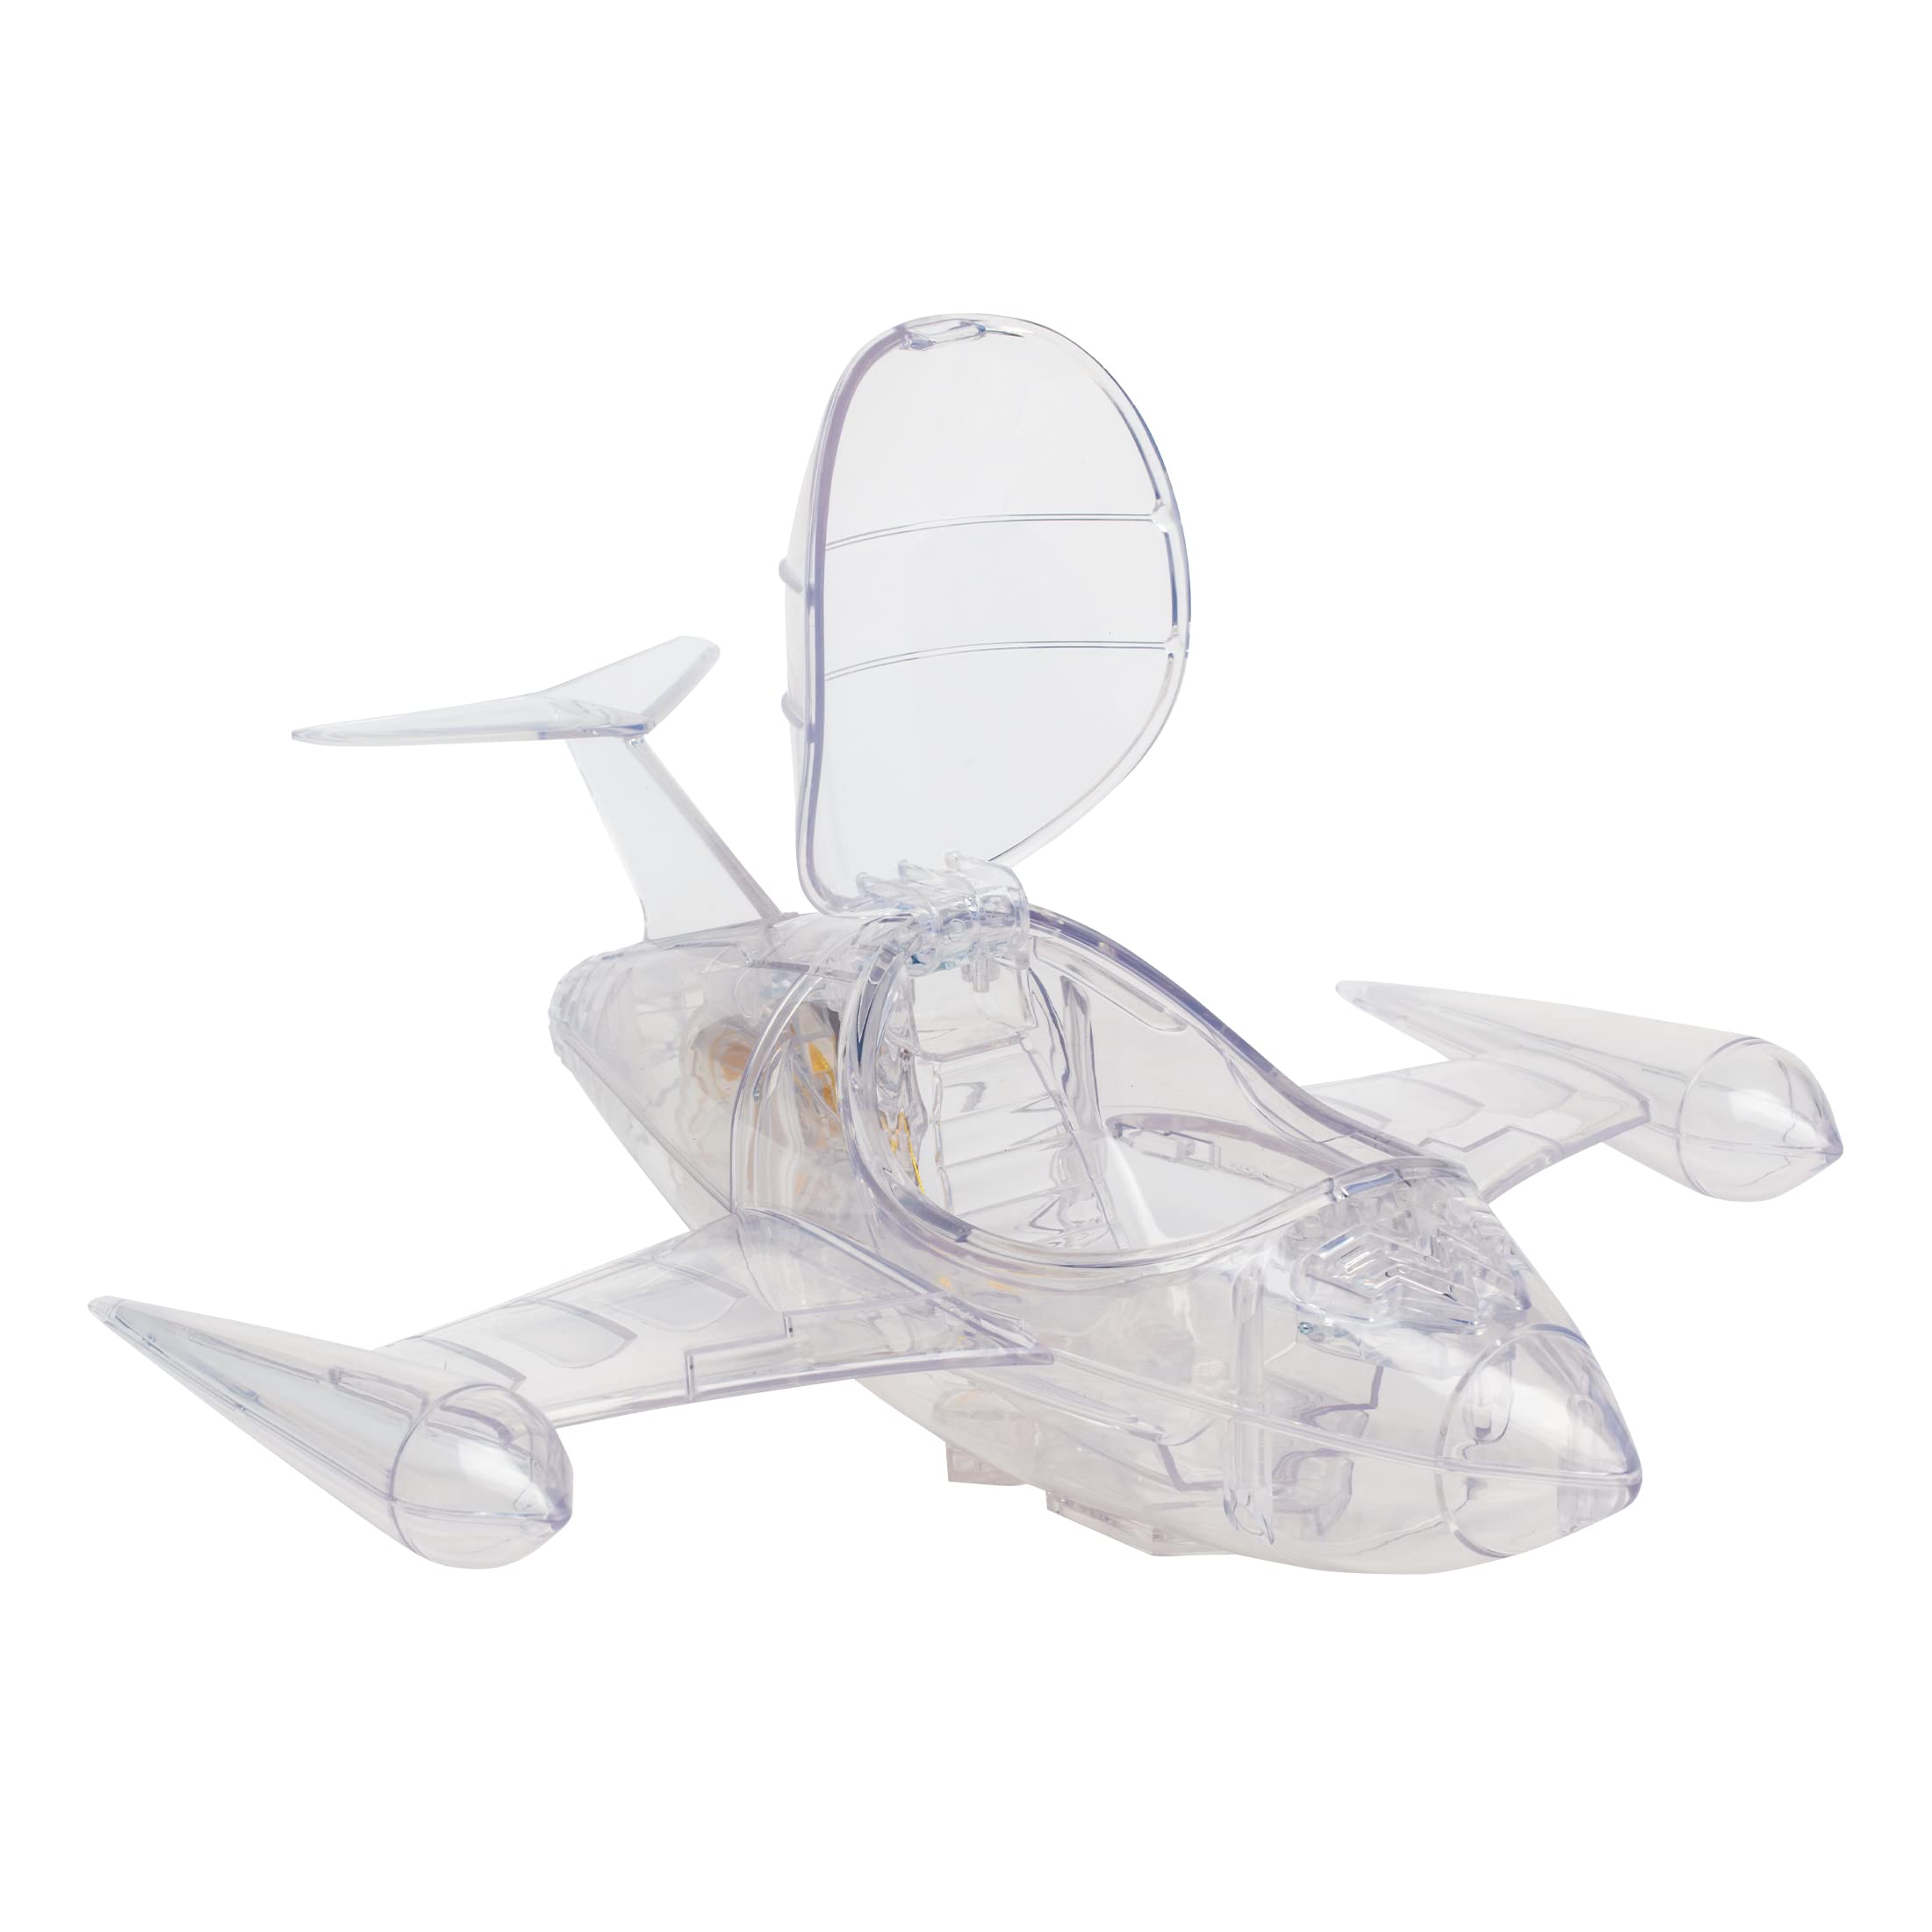 McFarlane Toys - DC Super Powers The Invisible Jet Vehicle